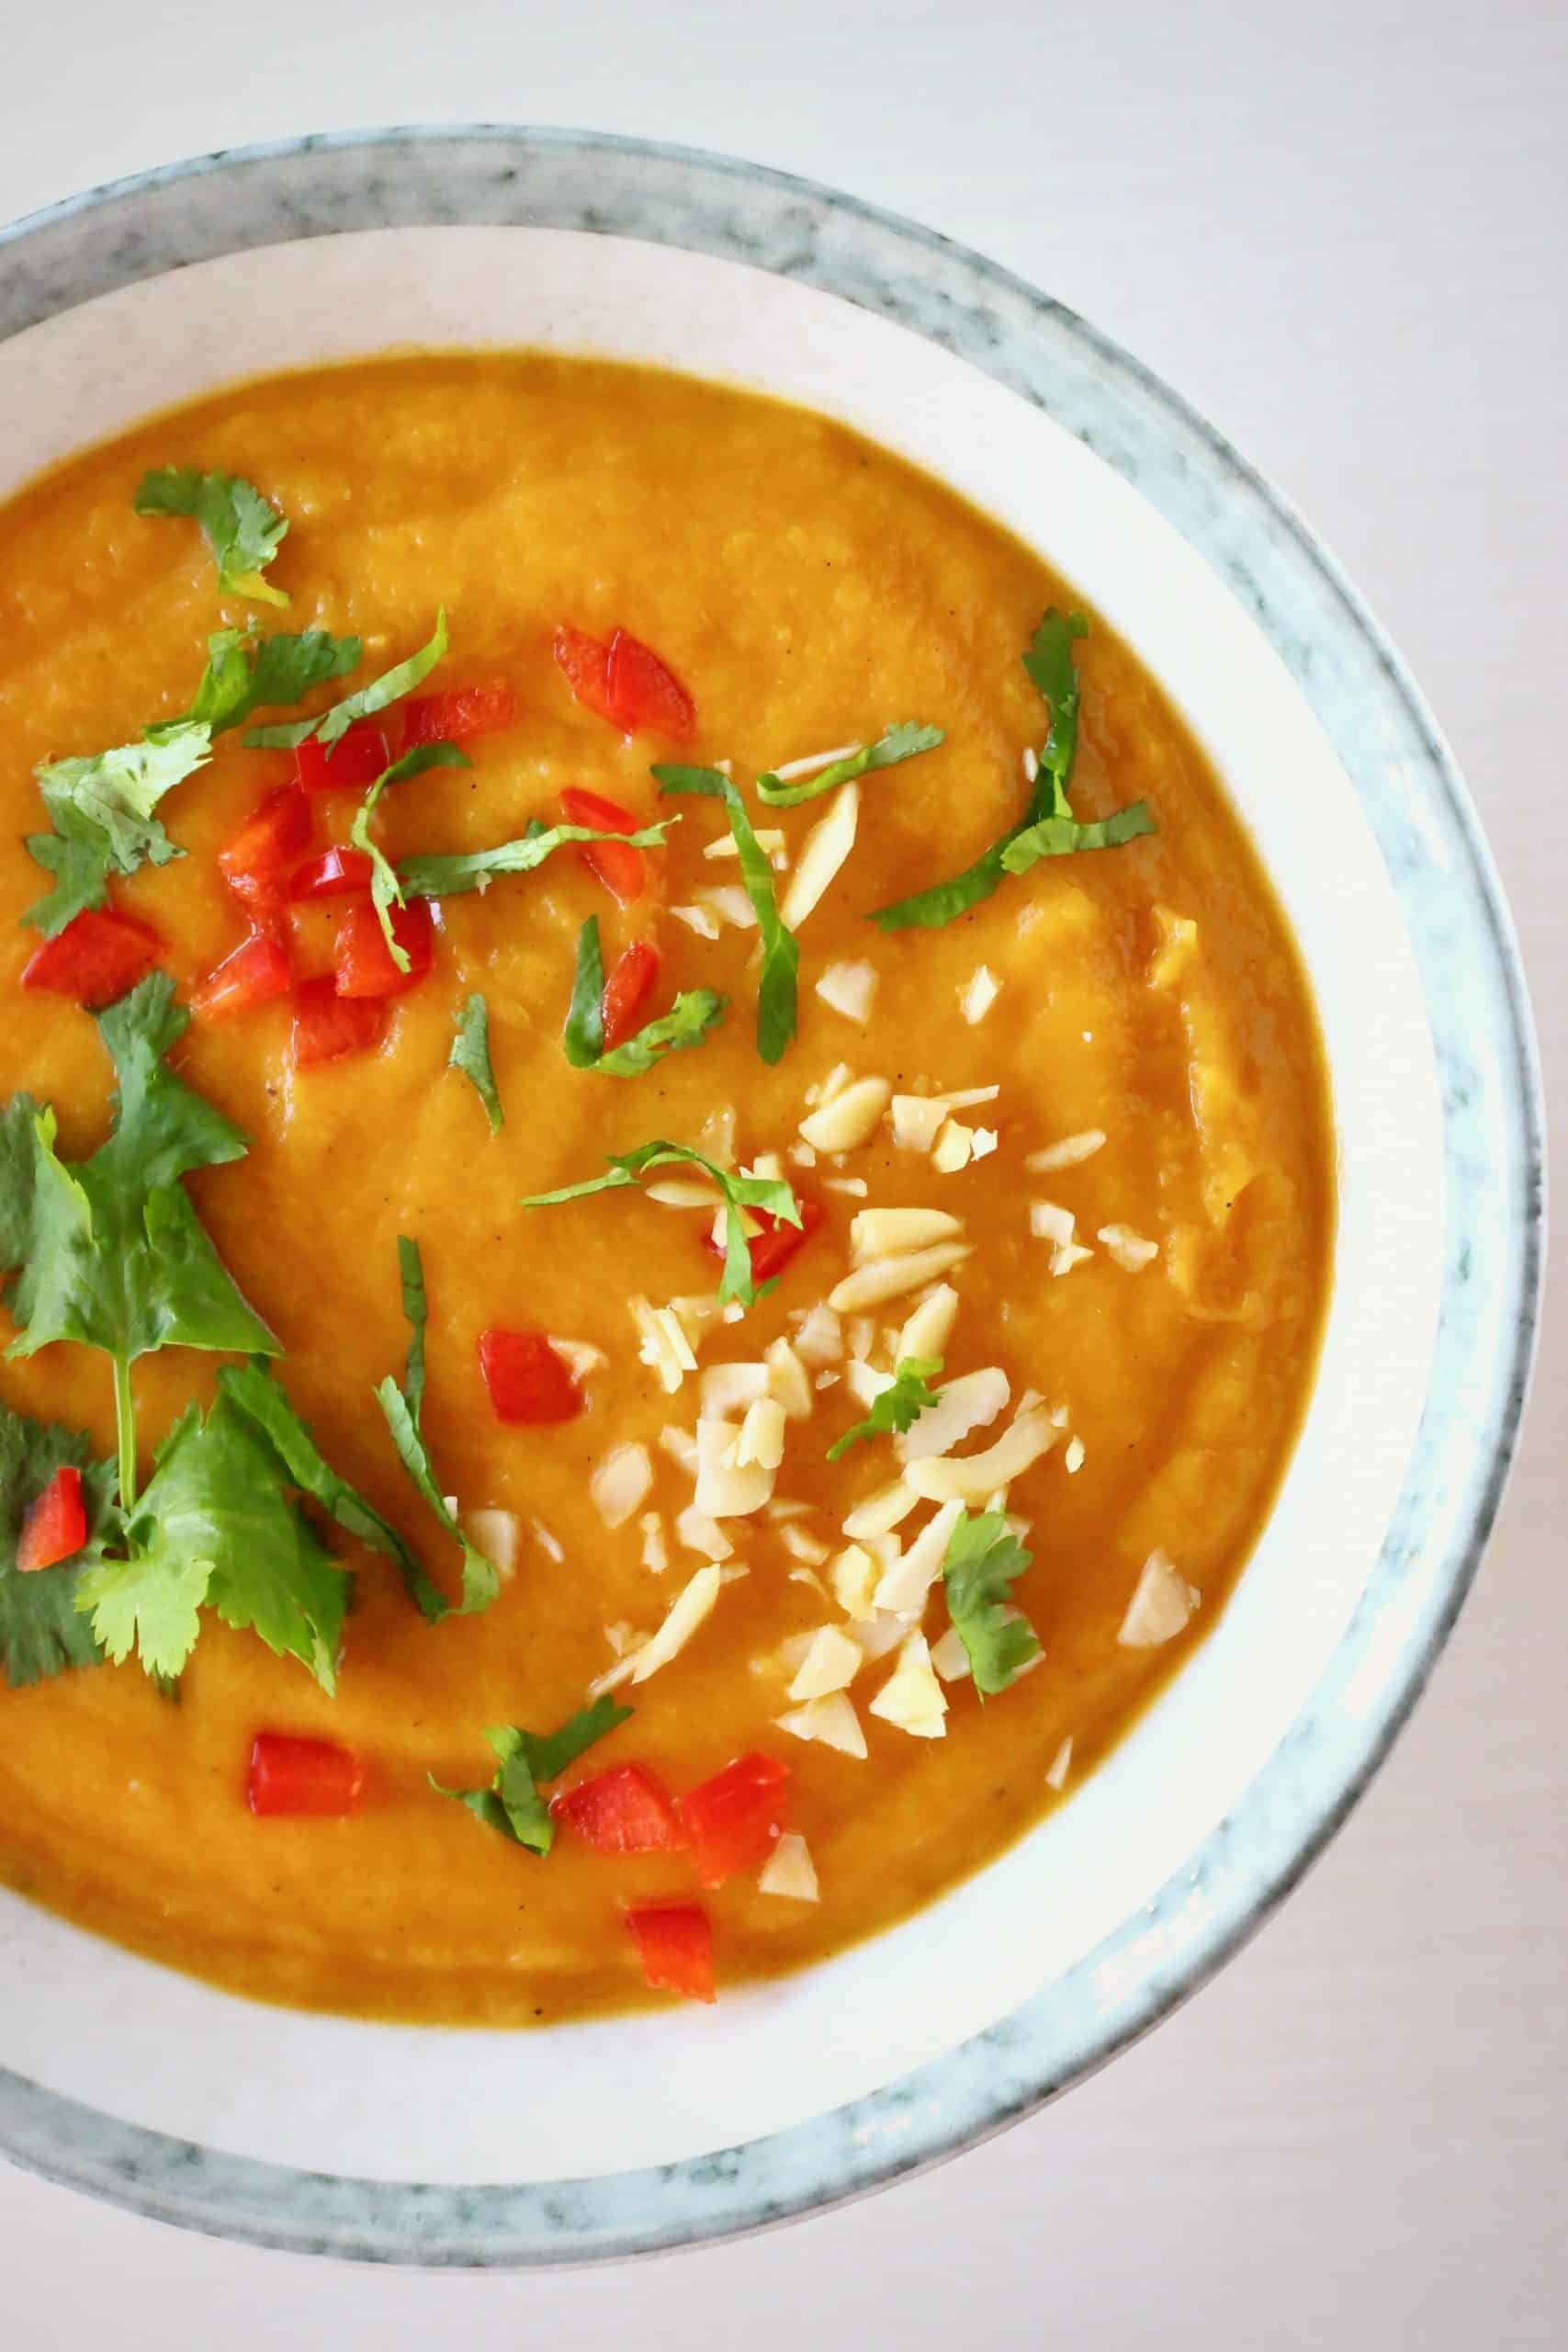 Orange soup topped with green herbs, red peppers and chopped peanuts in a grey bowl 